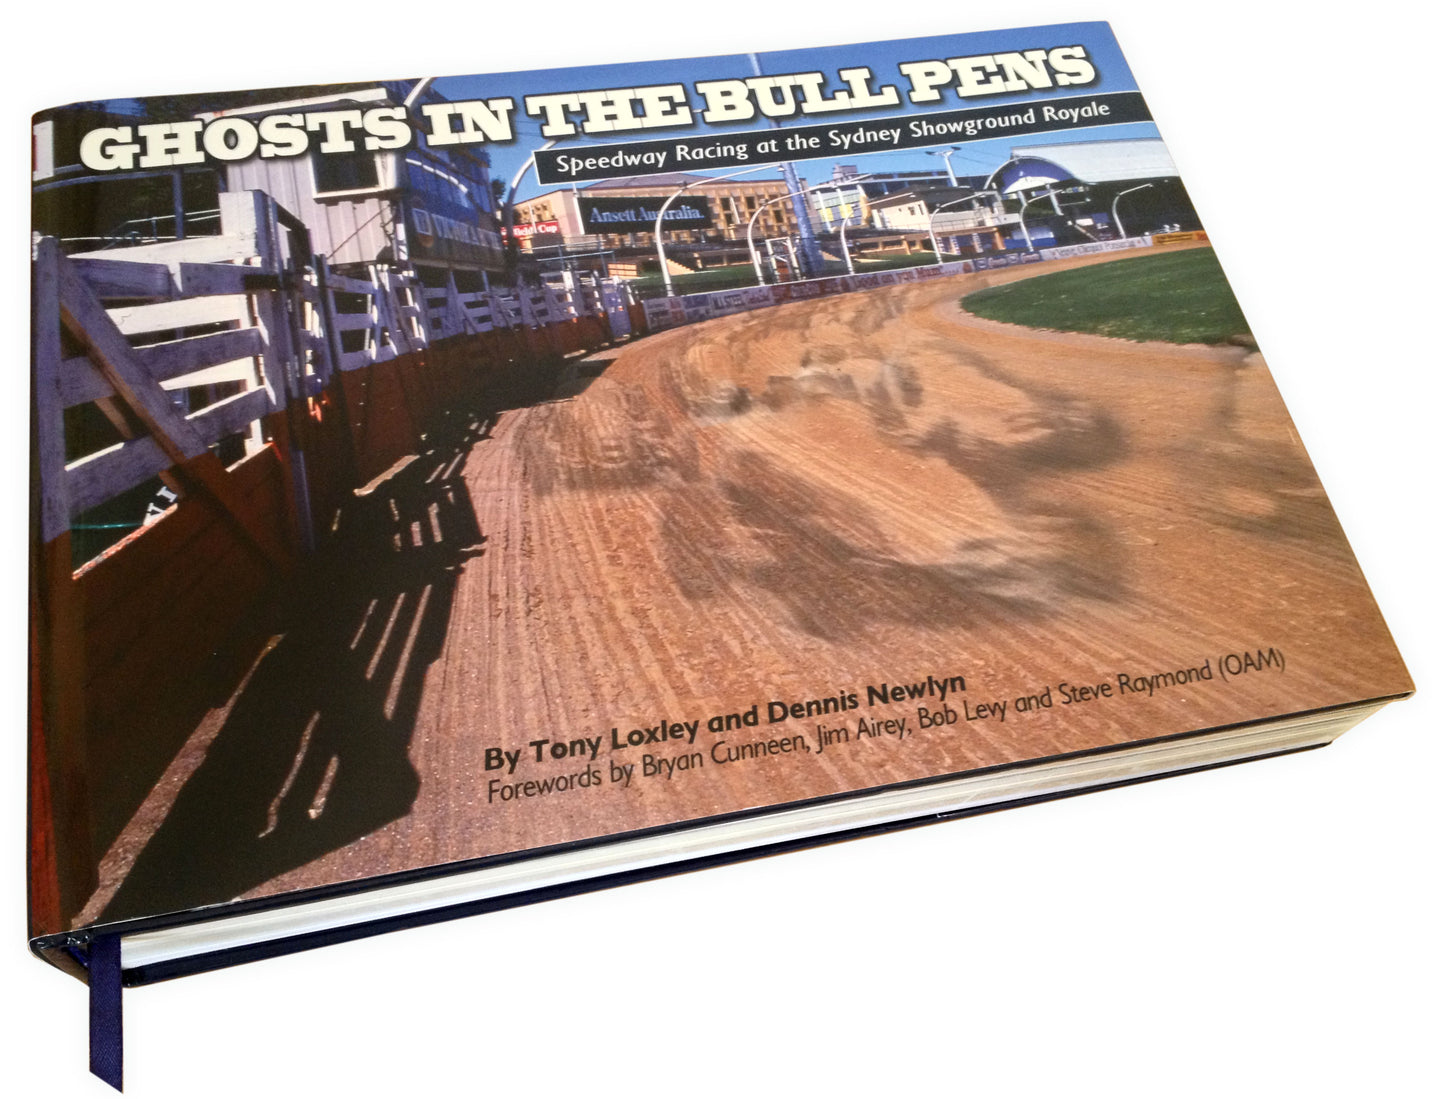 'Ghosts in the bull pens' - Speedway racing at the sydney showground royale